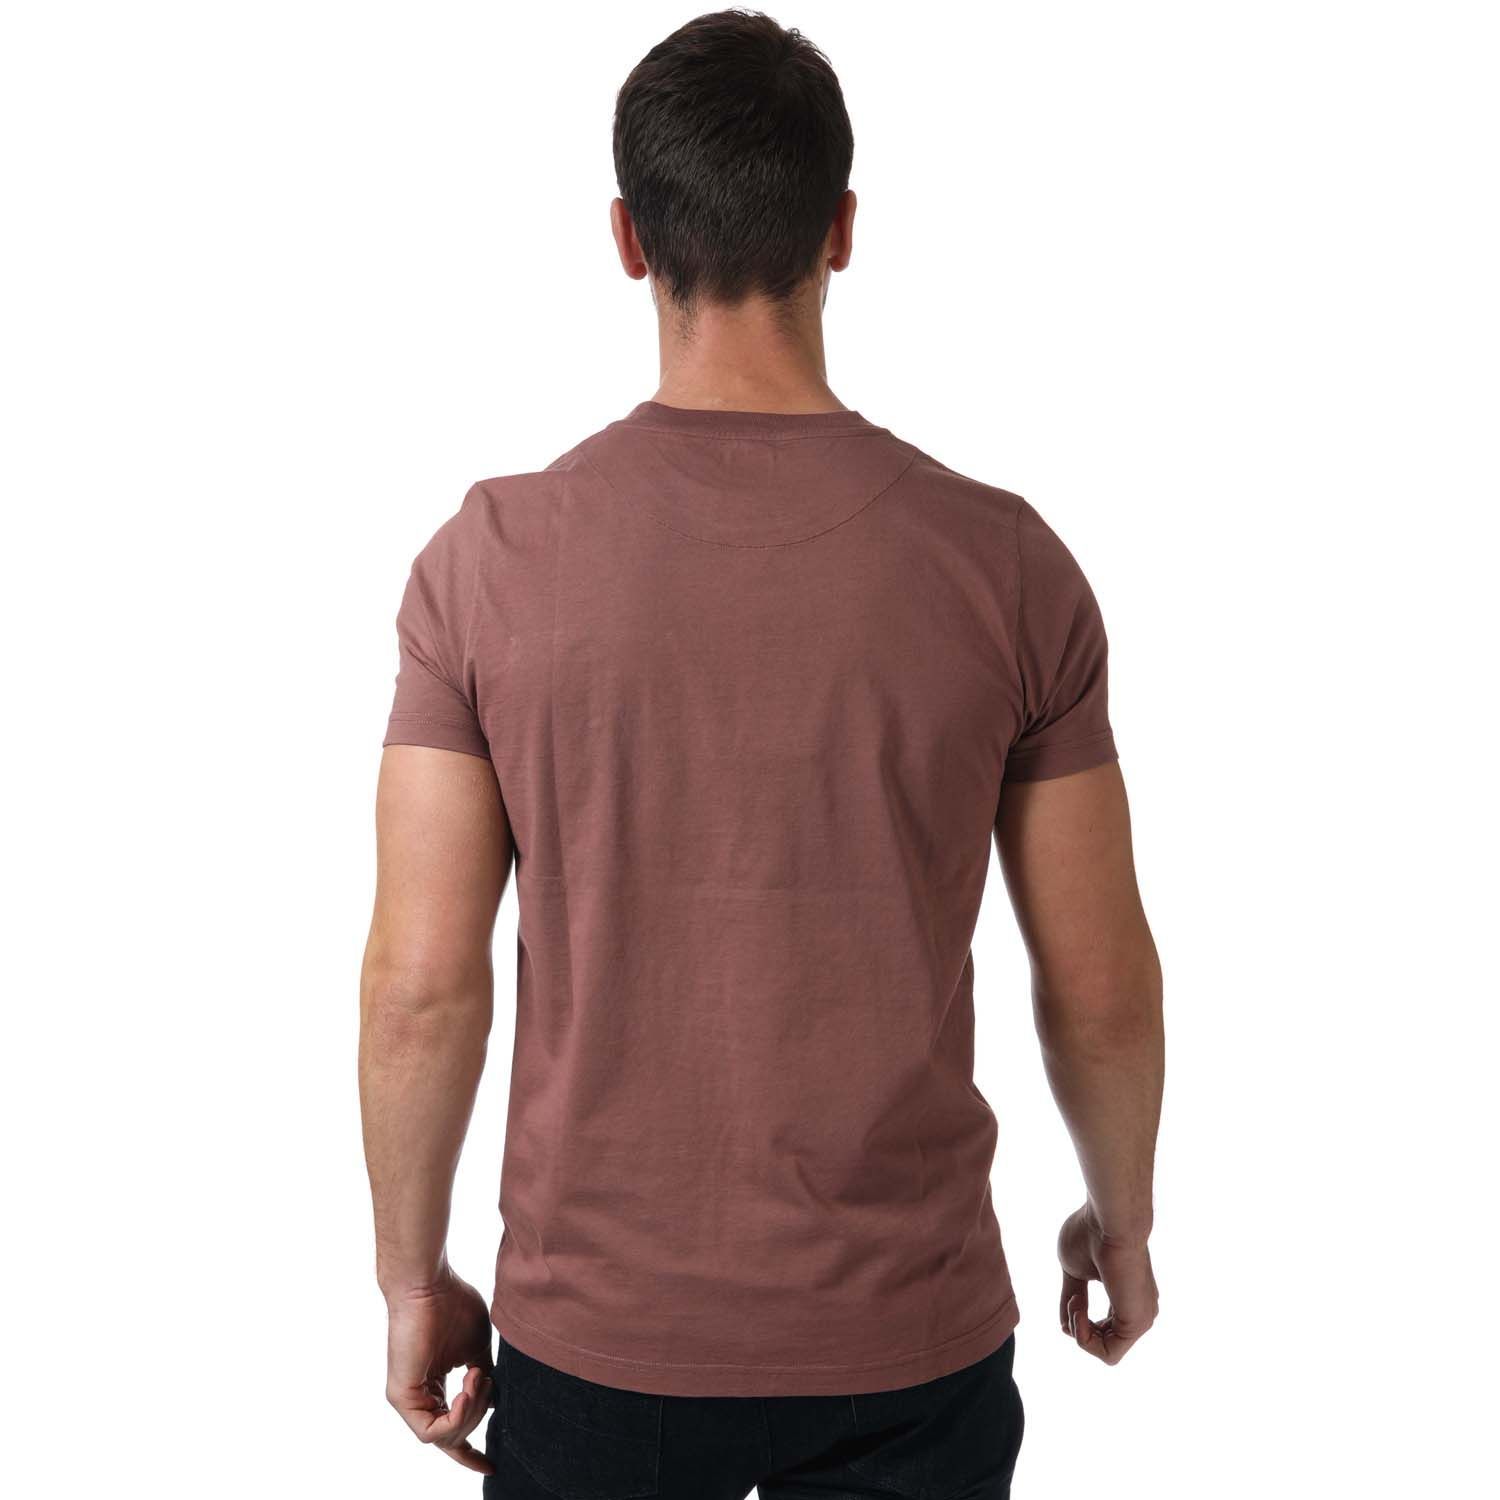 Pretty Green Vega Pocket T- Shirt in burgundy.- Ribbed crew neckline.- Short sleeves.- Pouch pocket is situated on the left of the chest.- Signature Pretty Green logo badge embroidered on top of the pocket.- Regular fit.- 100% Organic Cotton.- Ref:G21Q3MUJER902B